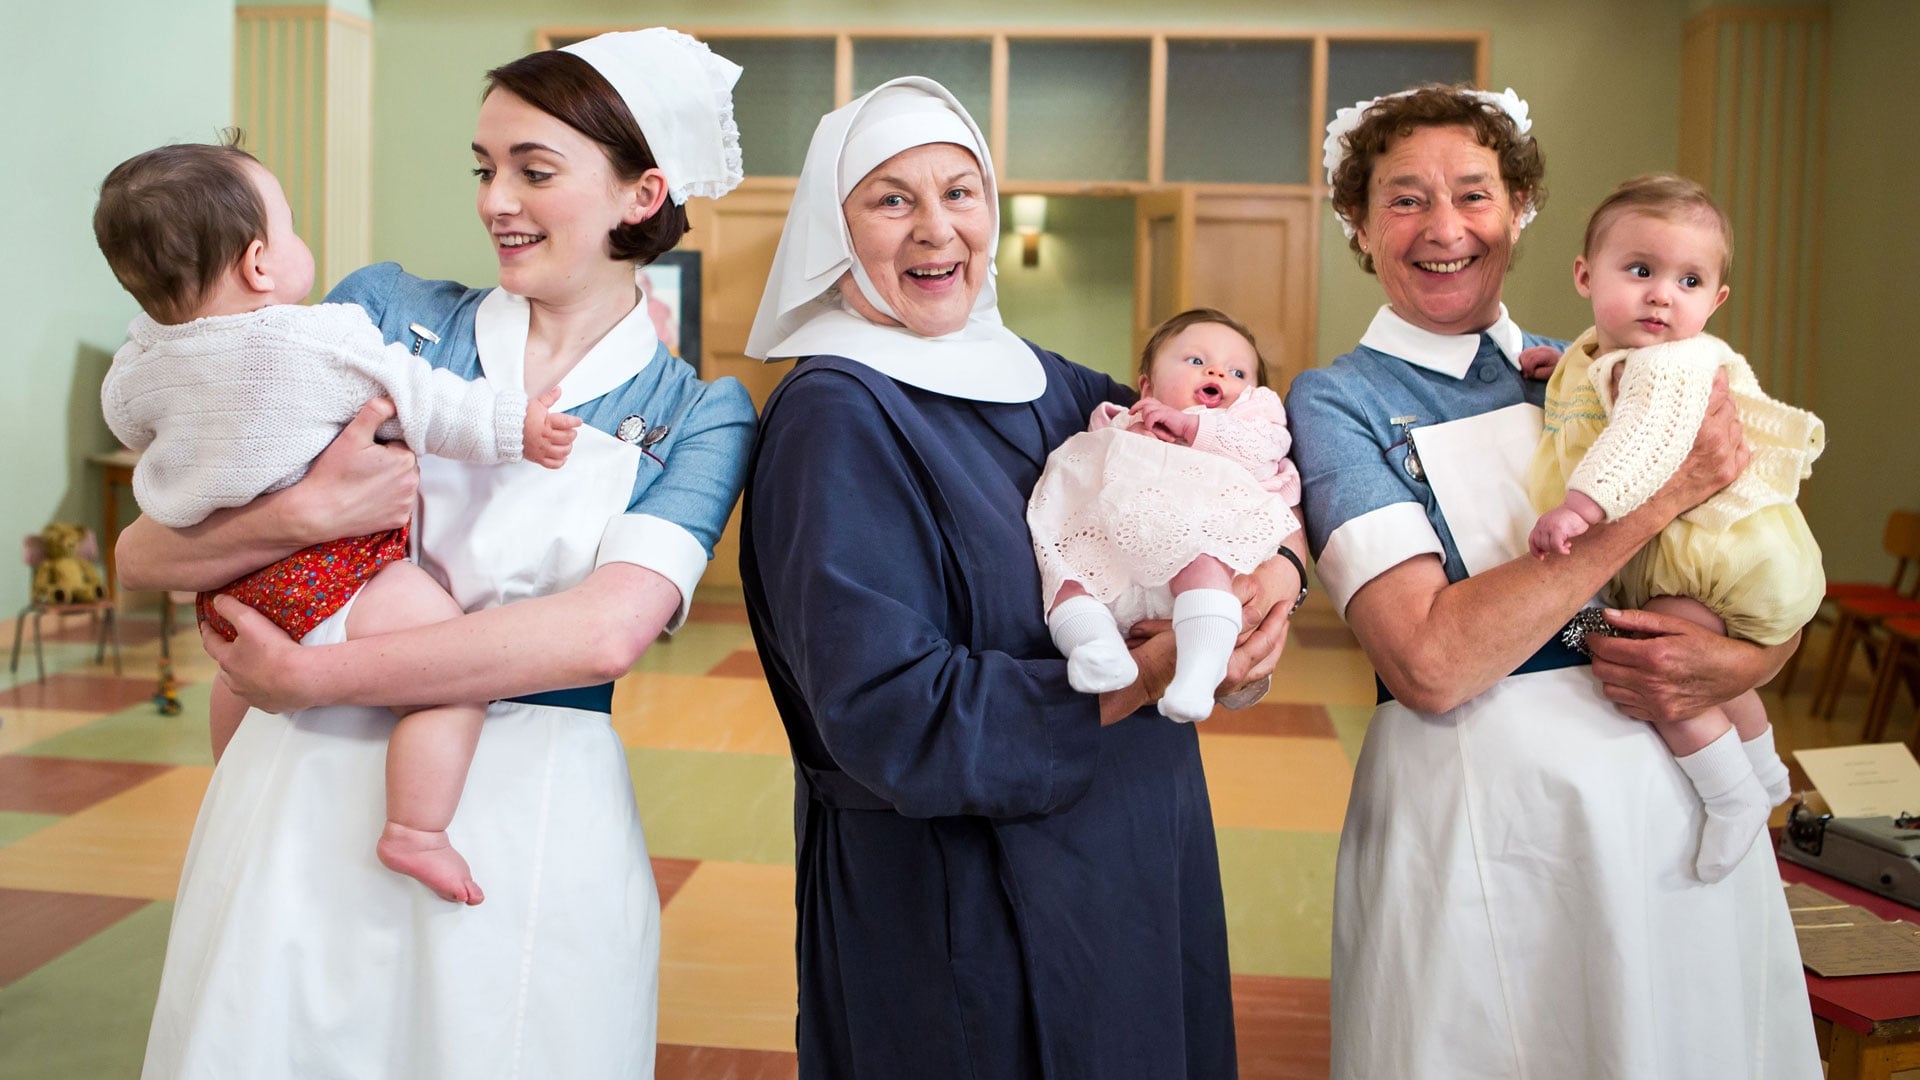 Call the Midwife. 